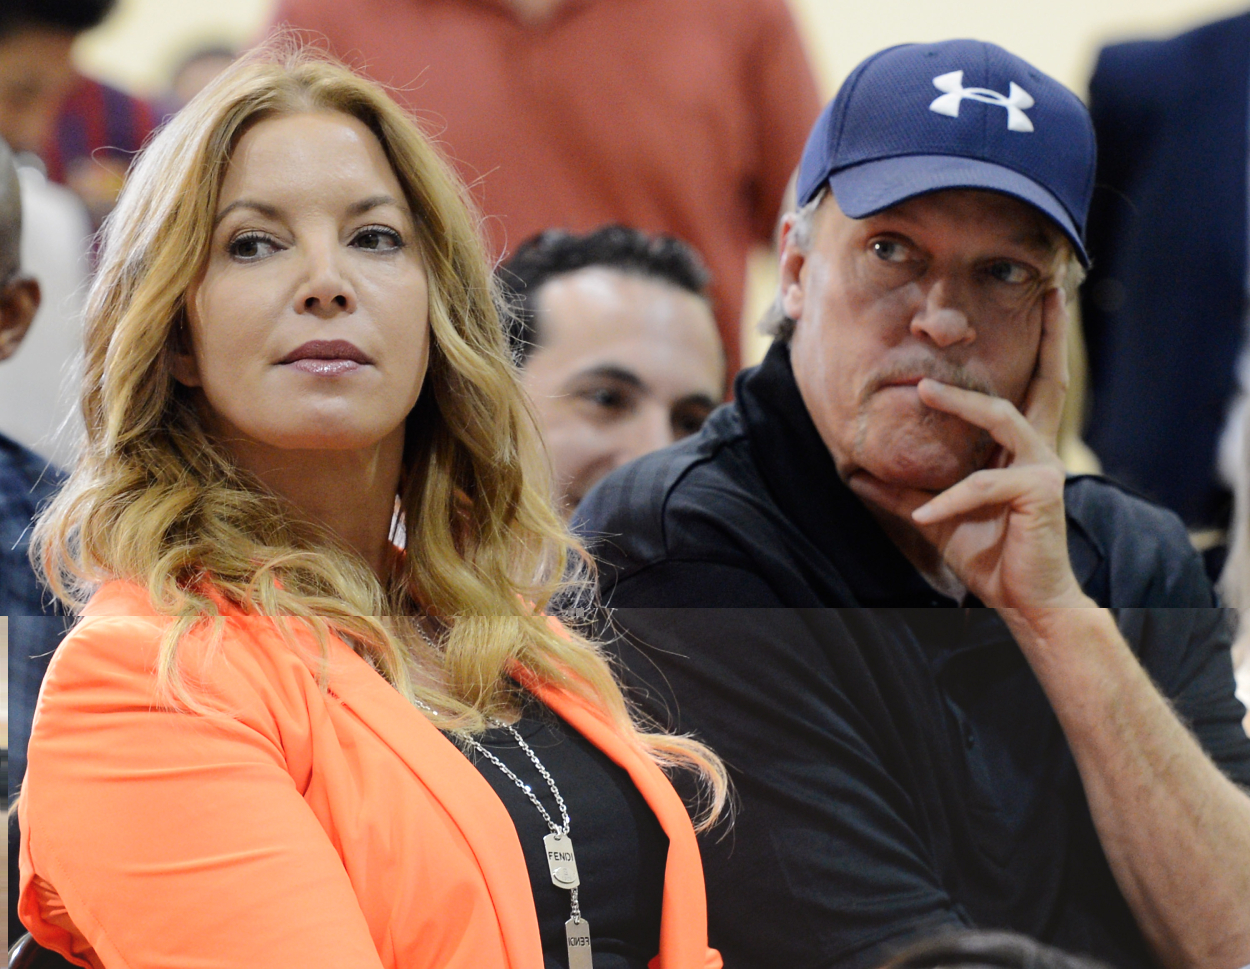 Los Angeles Lakers owner Jeanie Buss and her brother Jim Buss.